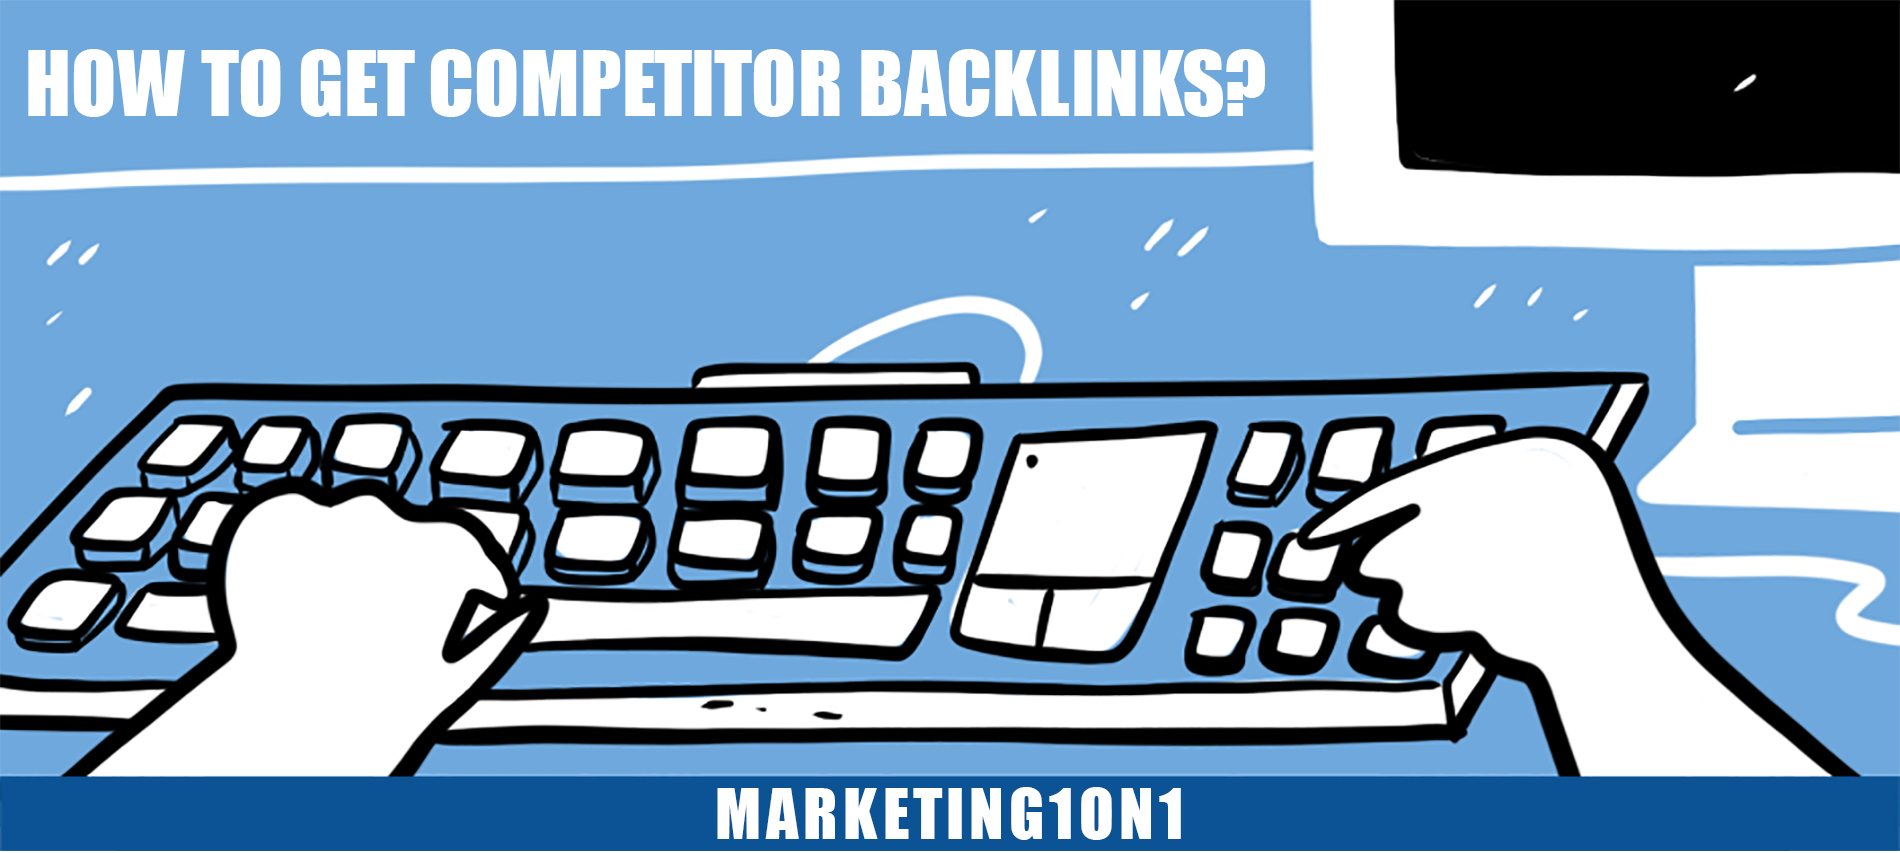 How to get competitor backlinks?